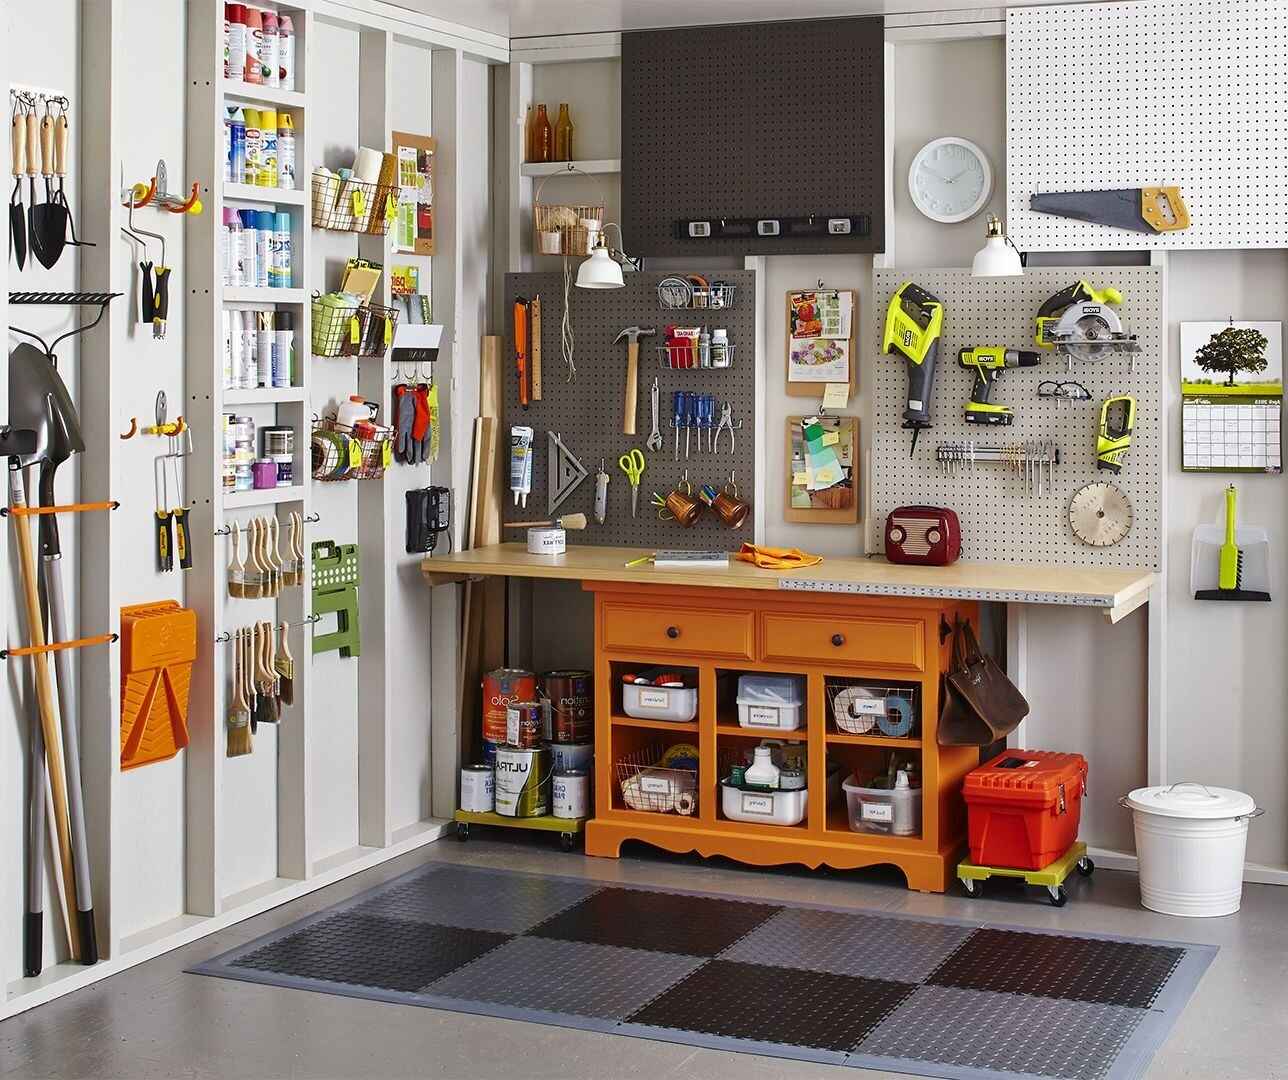 DIY Wall Shelves: Creative And Functional Storage Solutions For Your Home